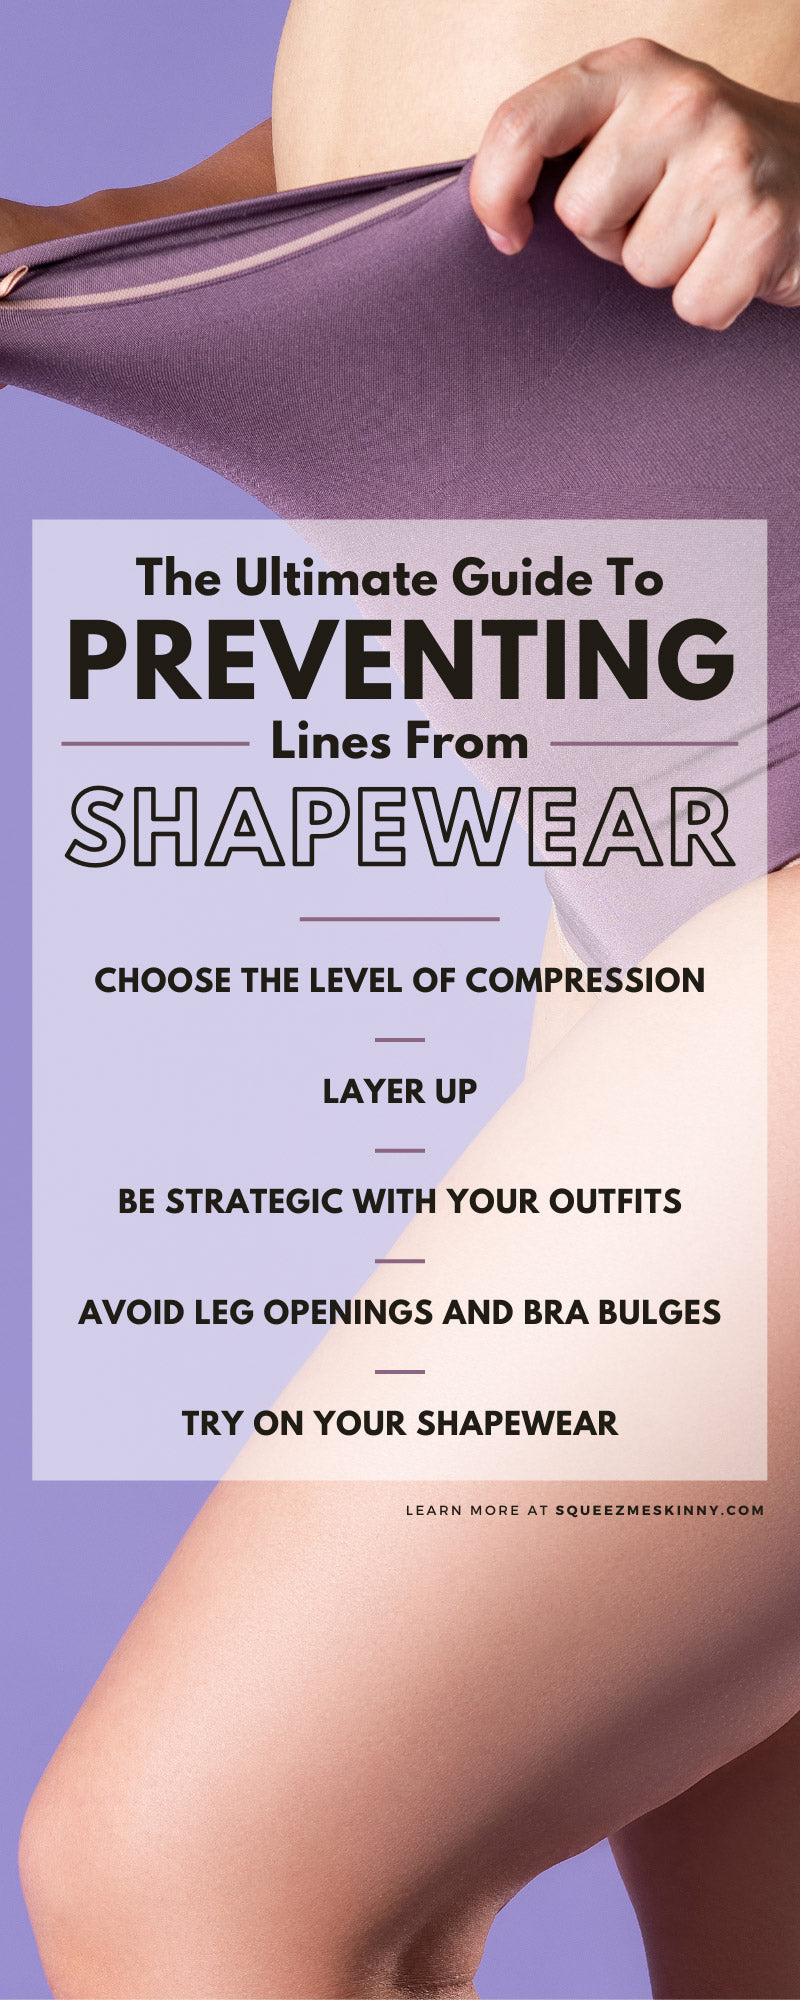 The Ultimate Guide To Preventing Lines From Shapewear – SqueezMeSkinny